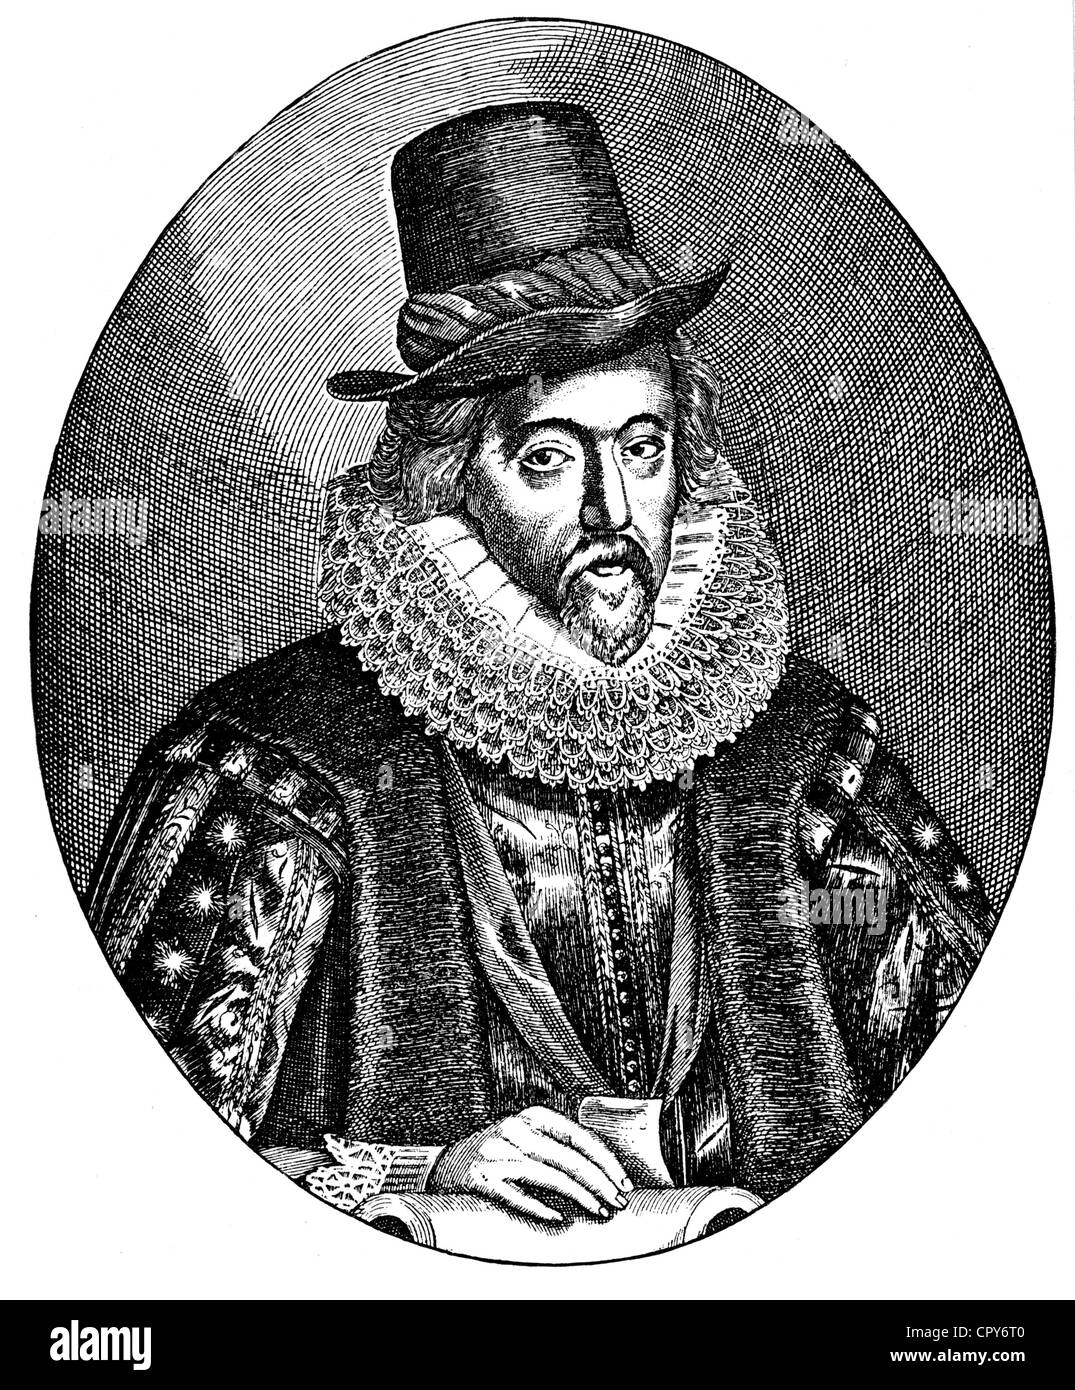 Bacon, Francis, Viscount Saint Alban, 22.1.1561 - 9.4.1626, English philosopher and politician, half length, copper engraving, 17th century, Artist's Copyright has not to be cleared Stock Photo